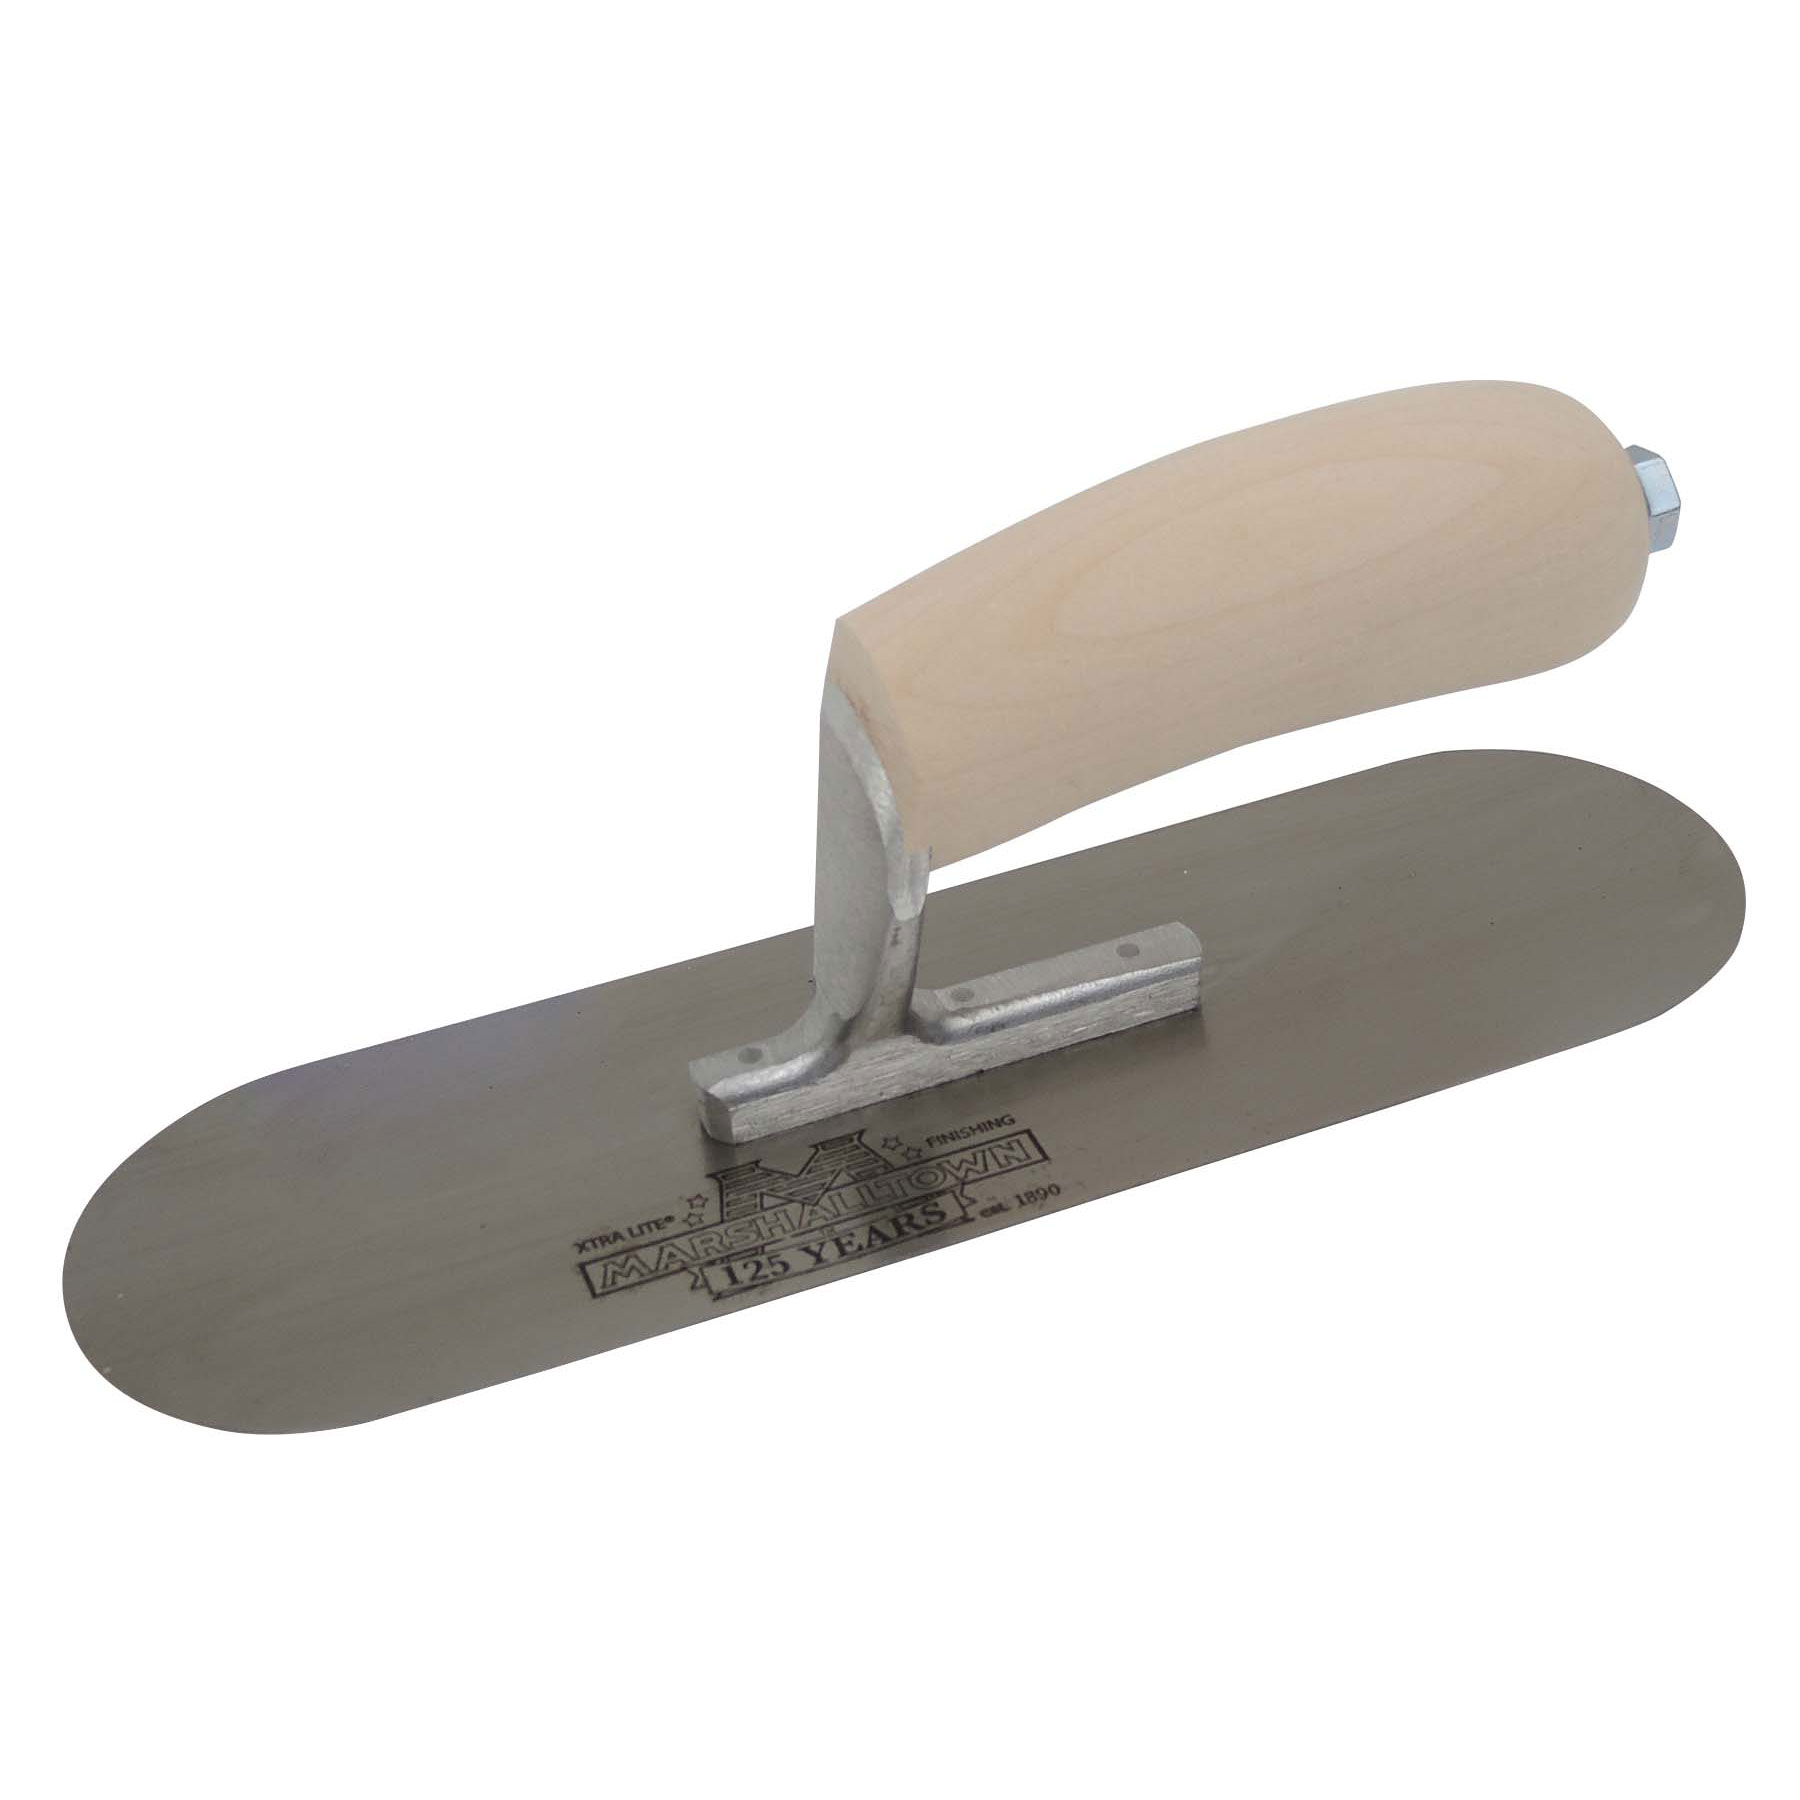 Marshalltown SP12S3 12in x 3-1/2in Pool Trowel with 3 Rivets and Wood Handle SP12S3